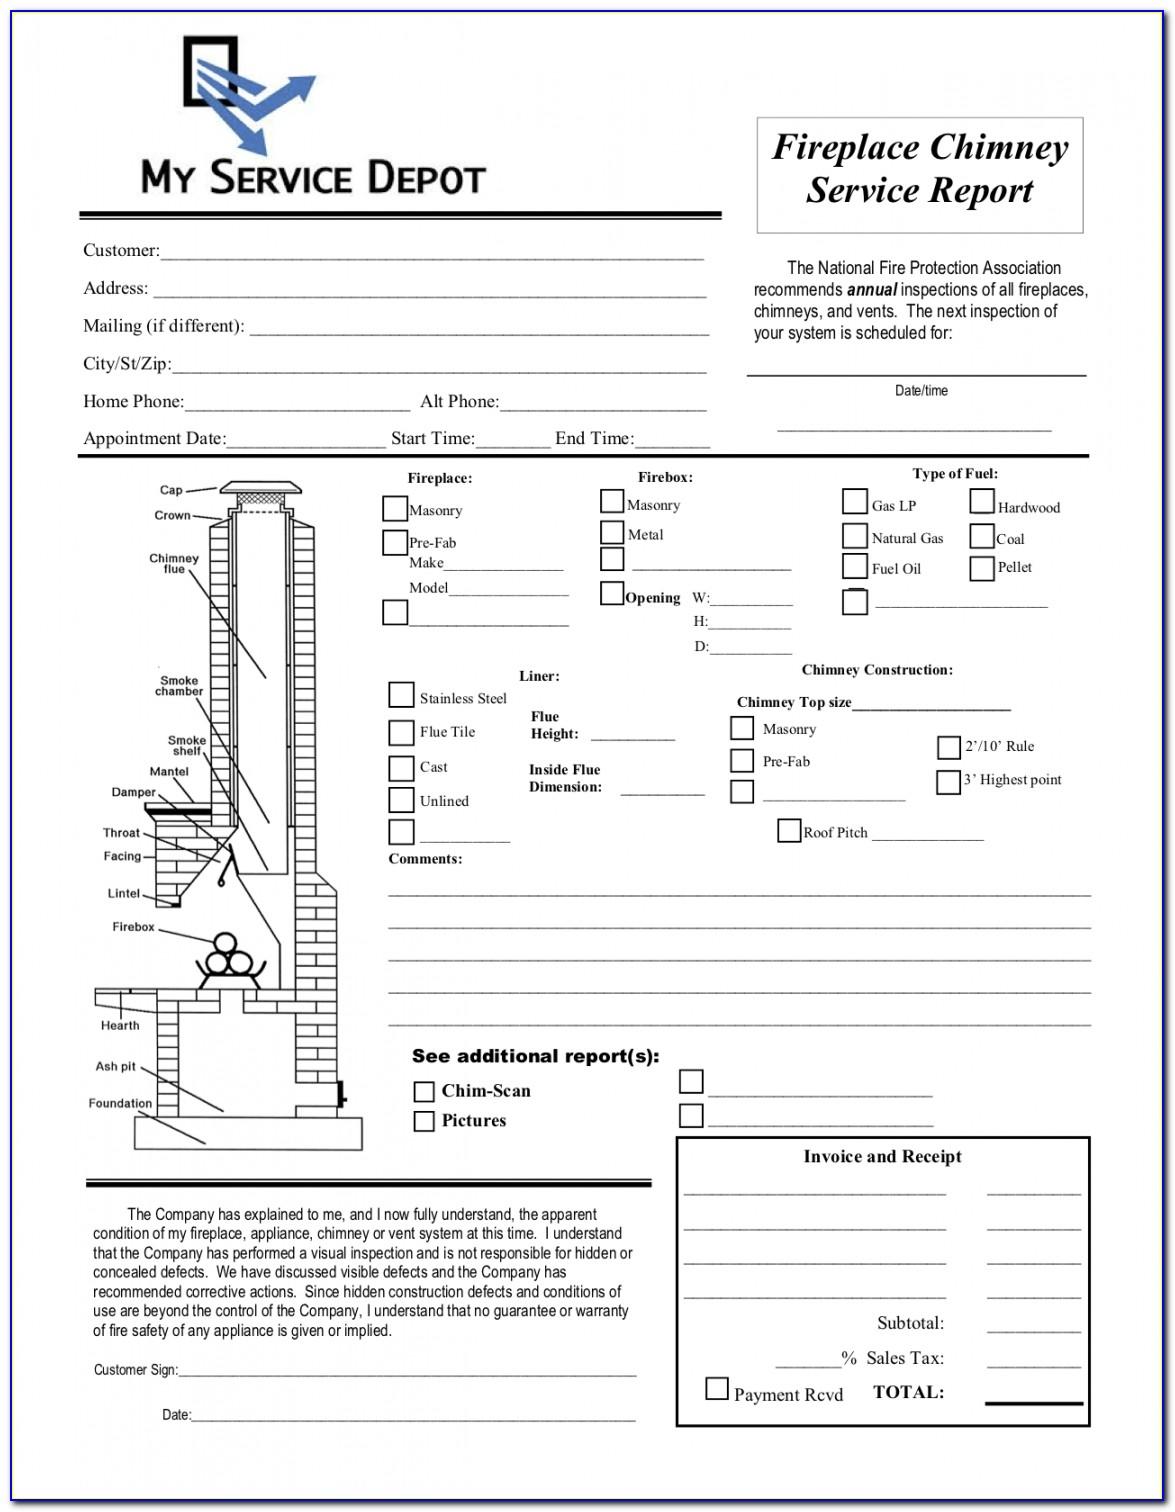 Chimney Inspection Report Template